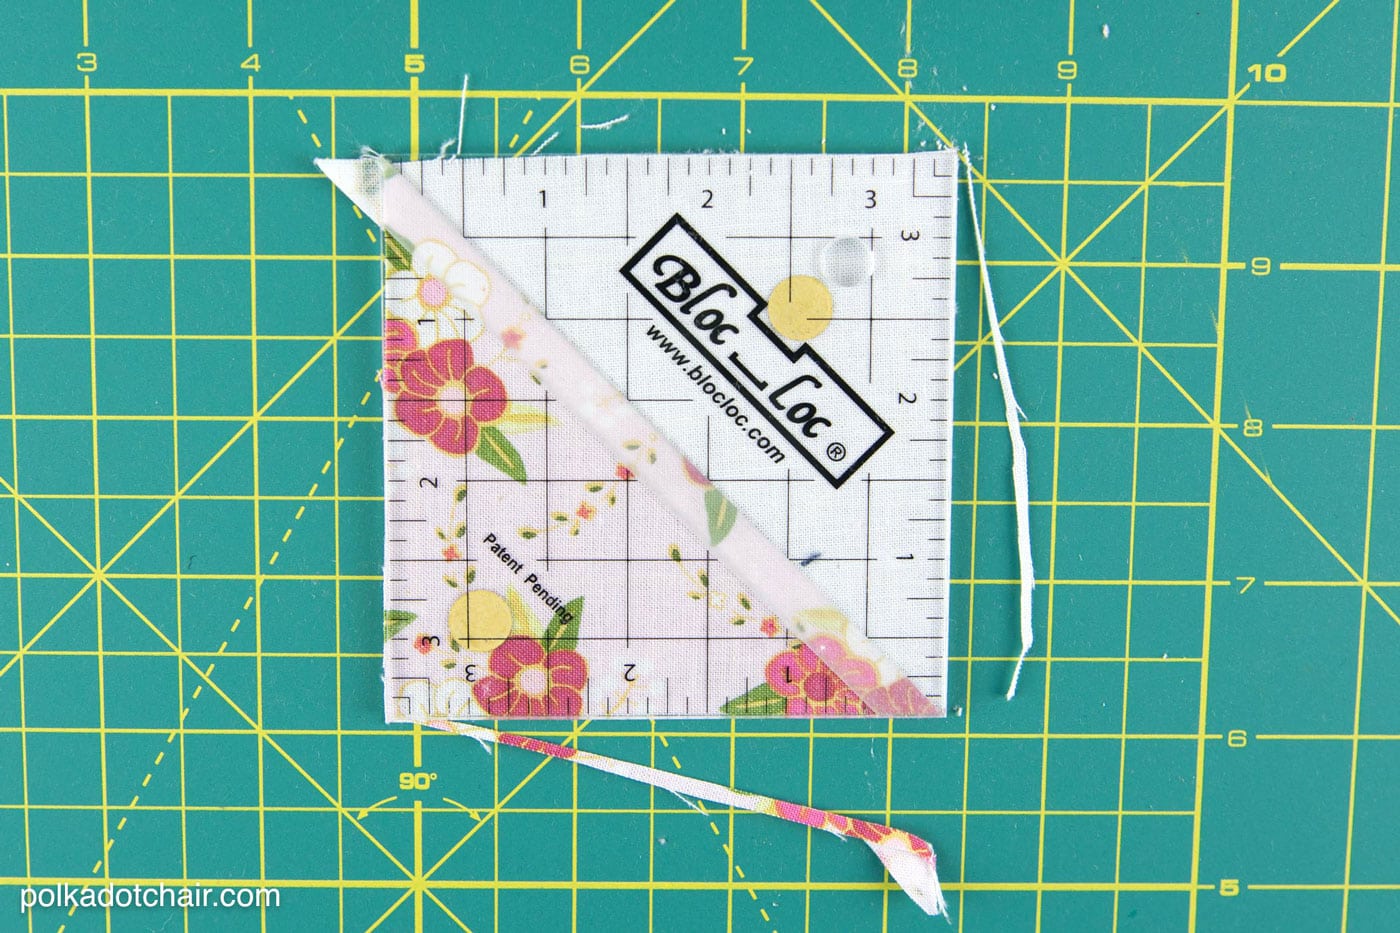 Tips and tricks to help you when you're constructing quilt blocks. Things like how to stay organized and how to trim HST blocks accurately. 